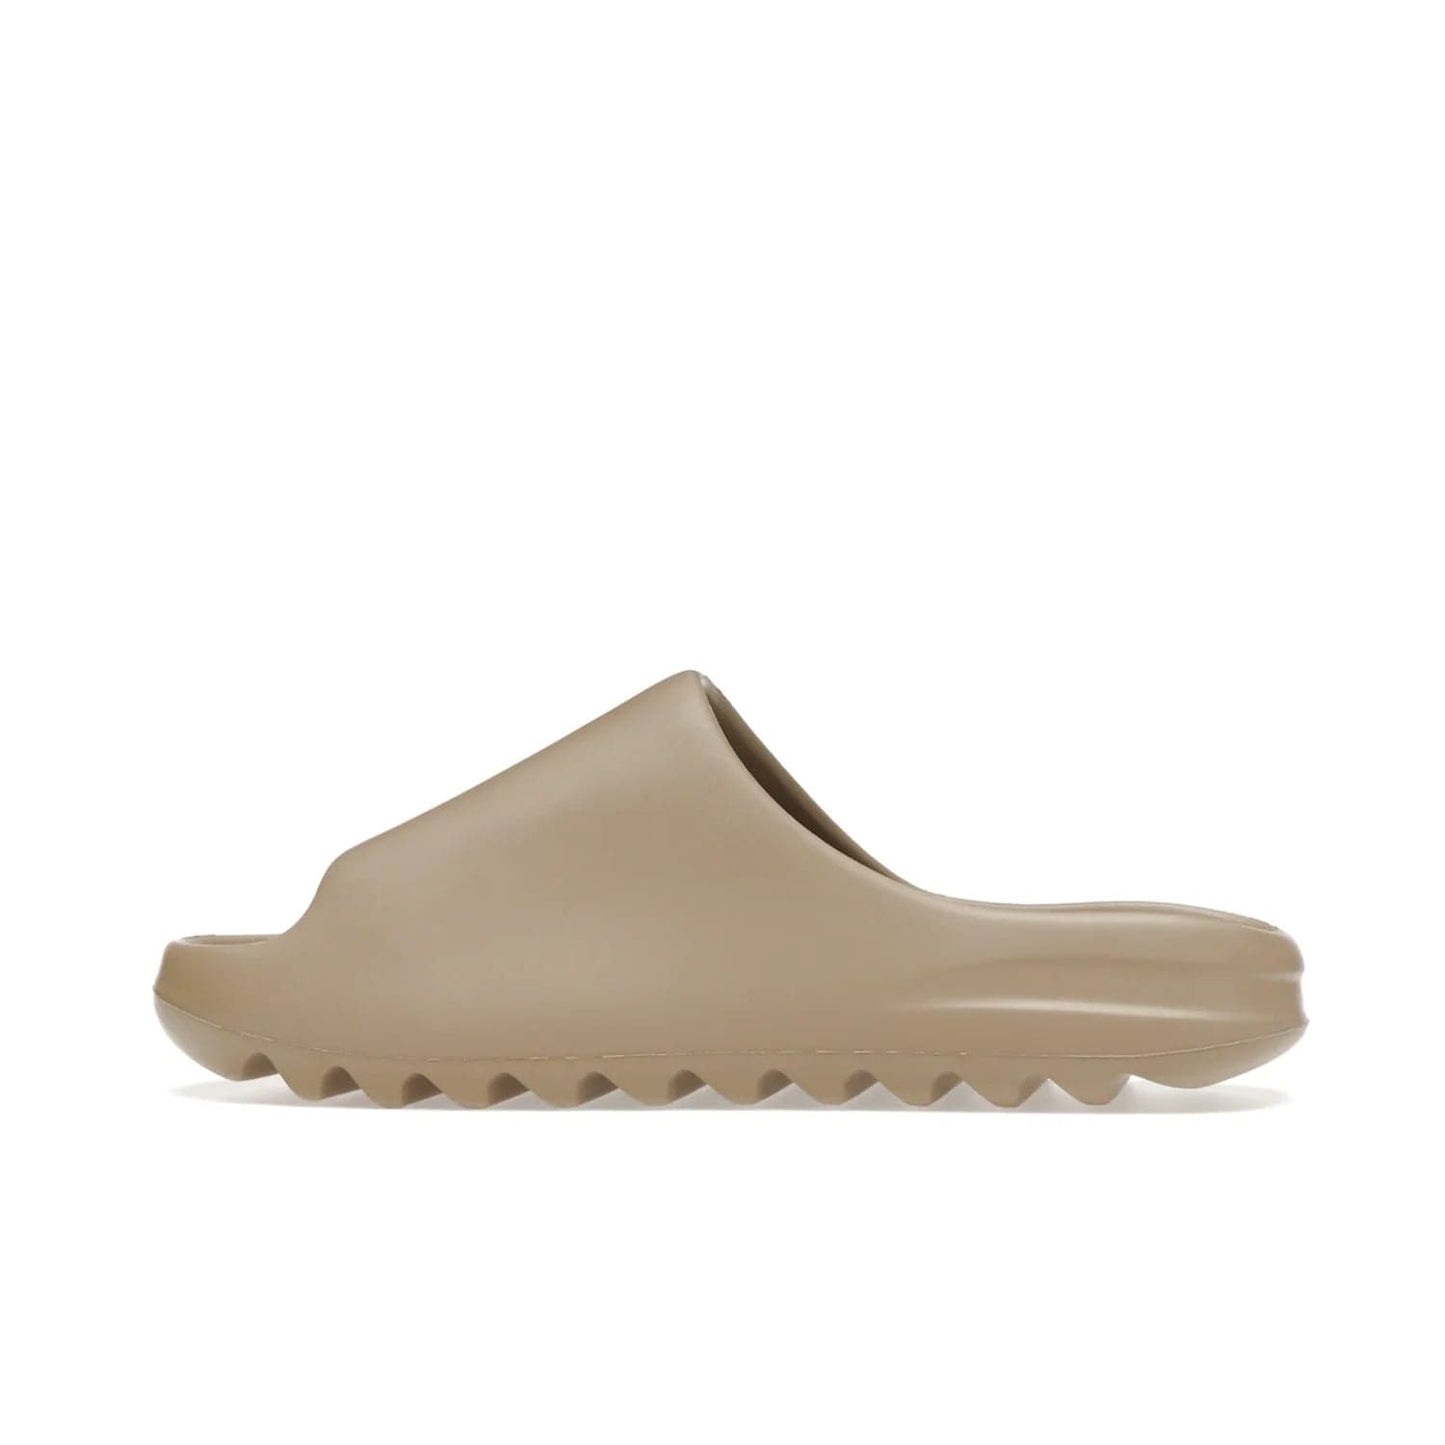 adidas Yeezy Slide Pure (First Release) - Image 20 - Only at www.BallersClubKickz.com - Shop the new adidas Yeezy Slide Pure at adidas. Crafted with a Pure EVA foam upper and soft footbed for instant comfort. Outsole with grooves offers traction & support for a perfect summer look. Available in Pure/Pure/Pure.